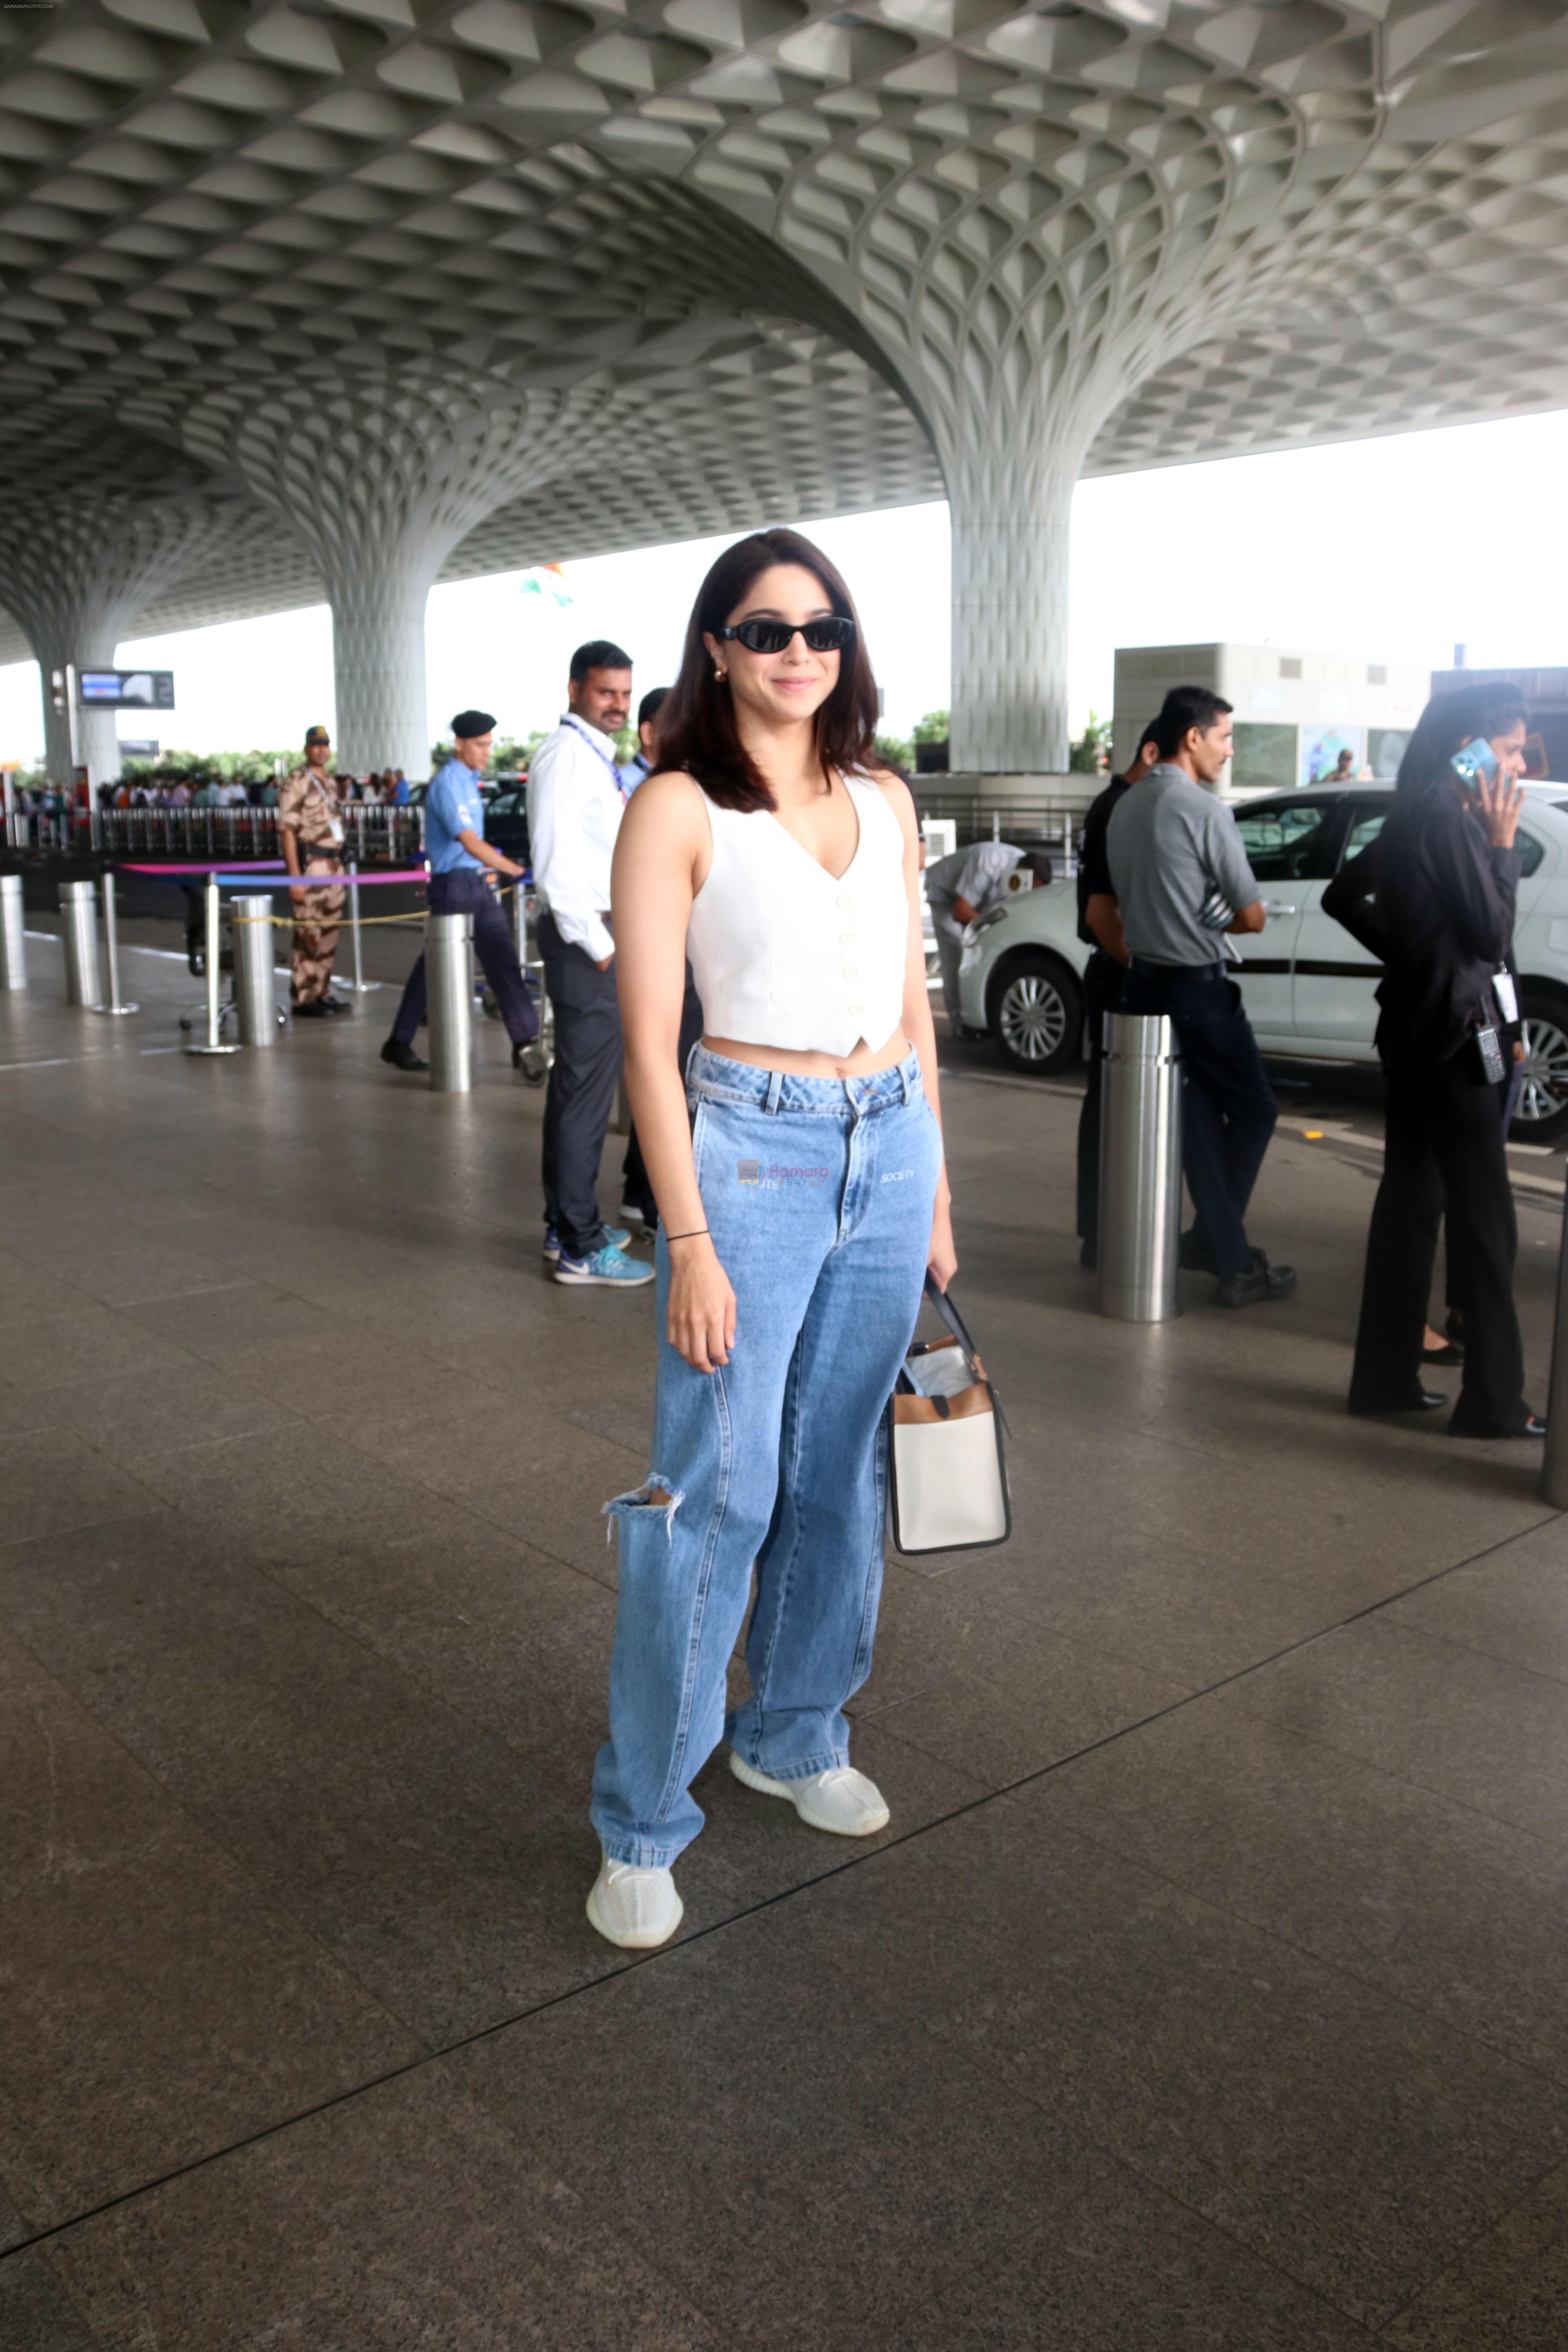 Sharvari Wagh dressed in white sleeveless top and blue jeans seen at the airport on 11 July 2023